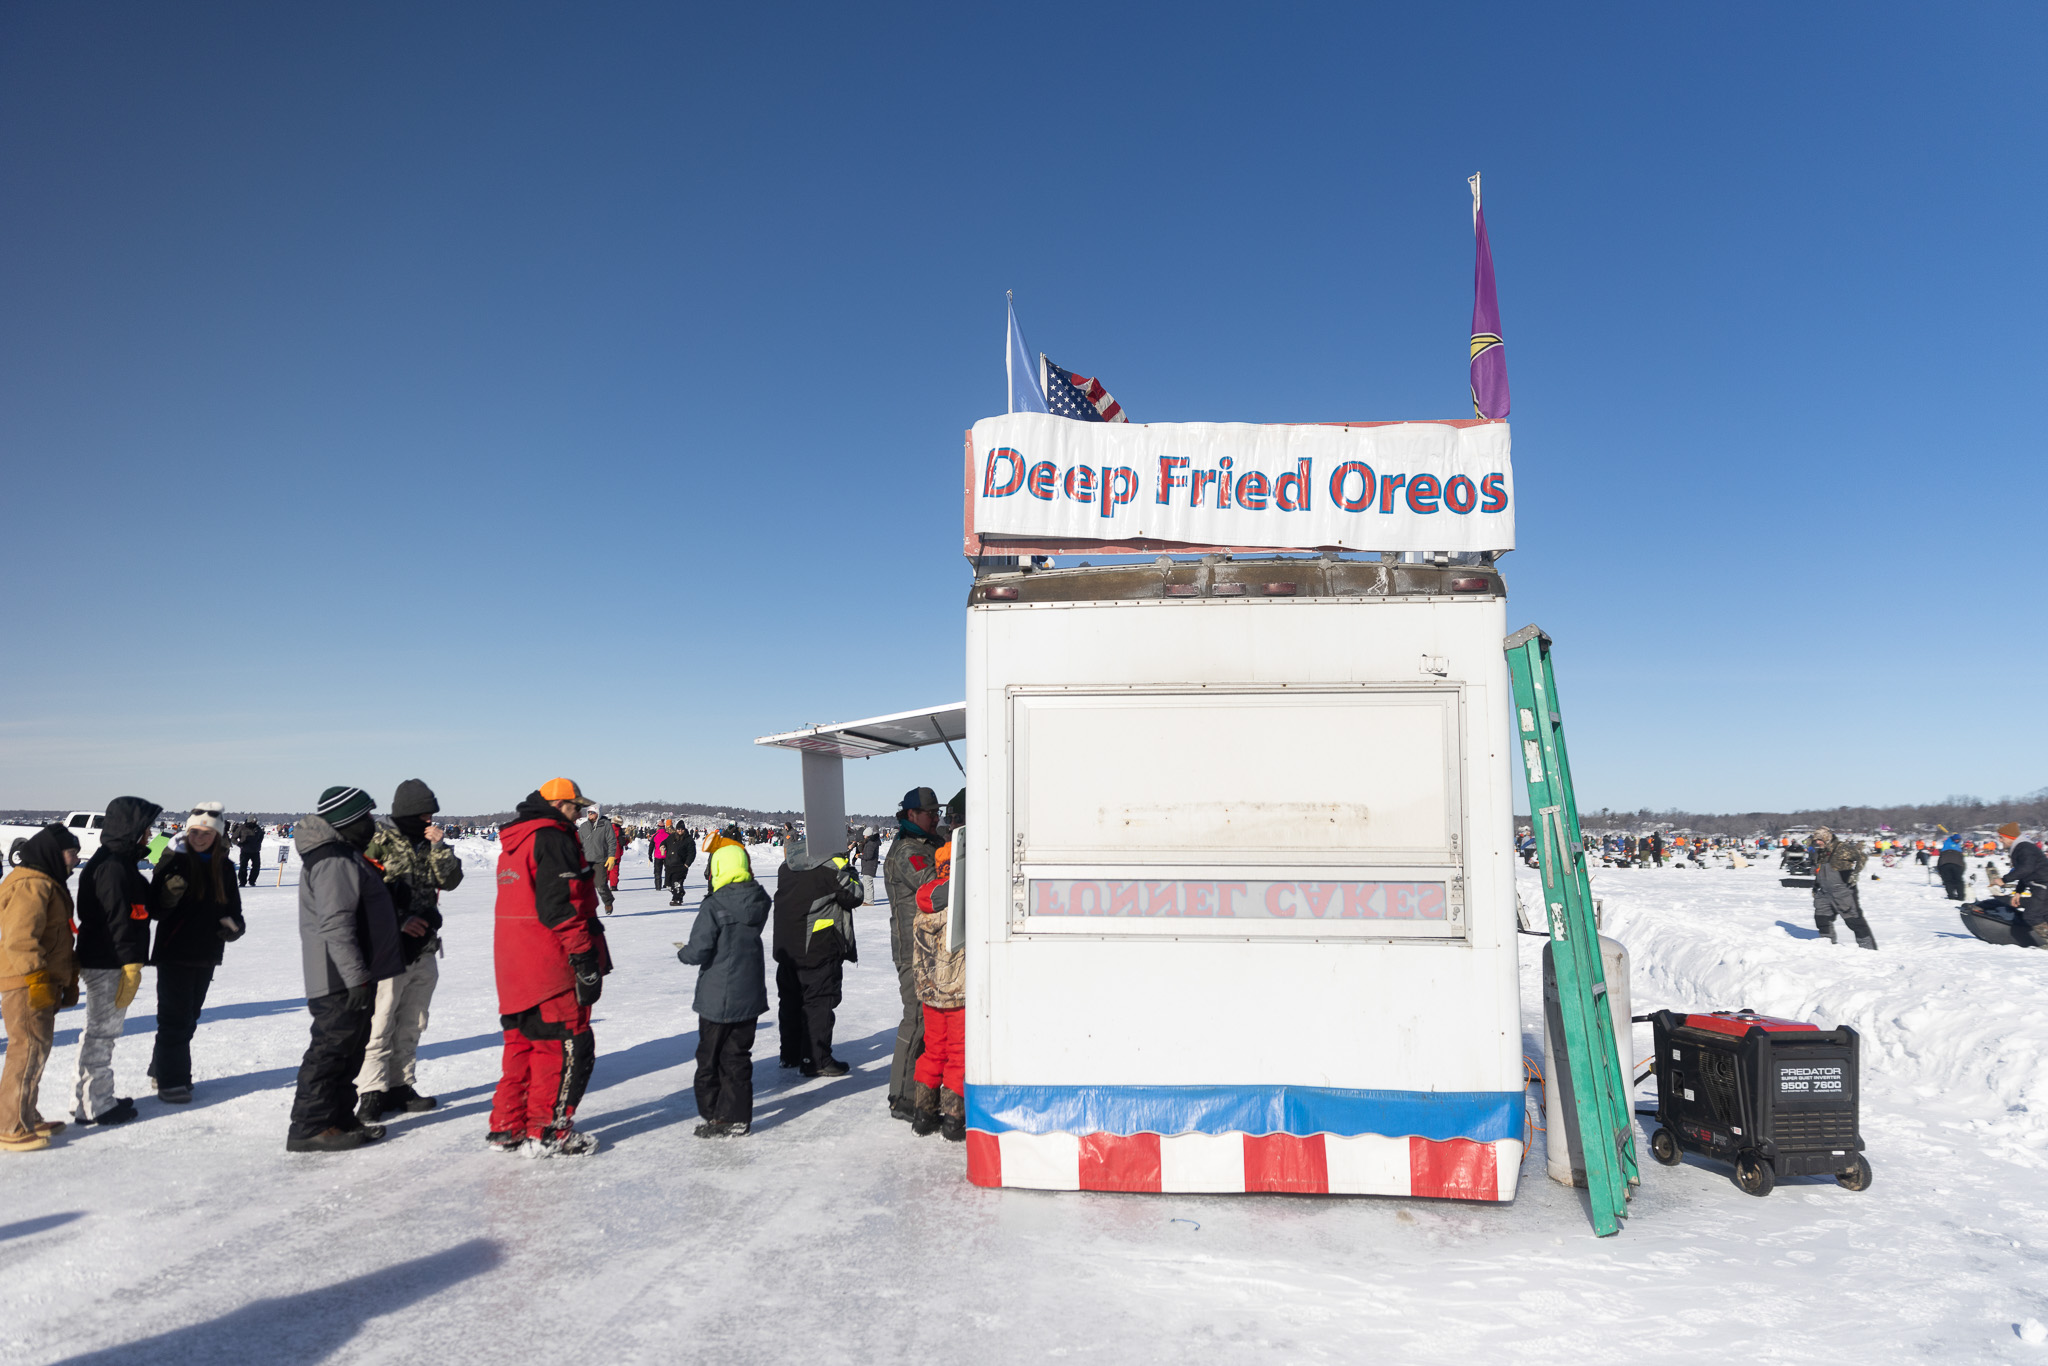 A food truck on the ice that sells deep-fried oreos to ice fishermen.